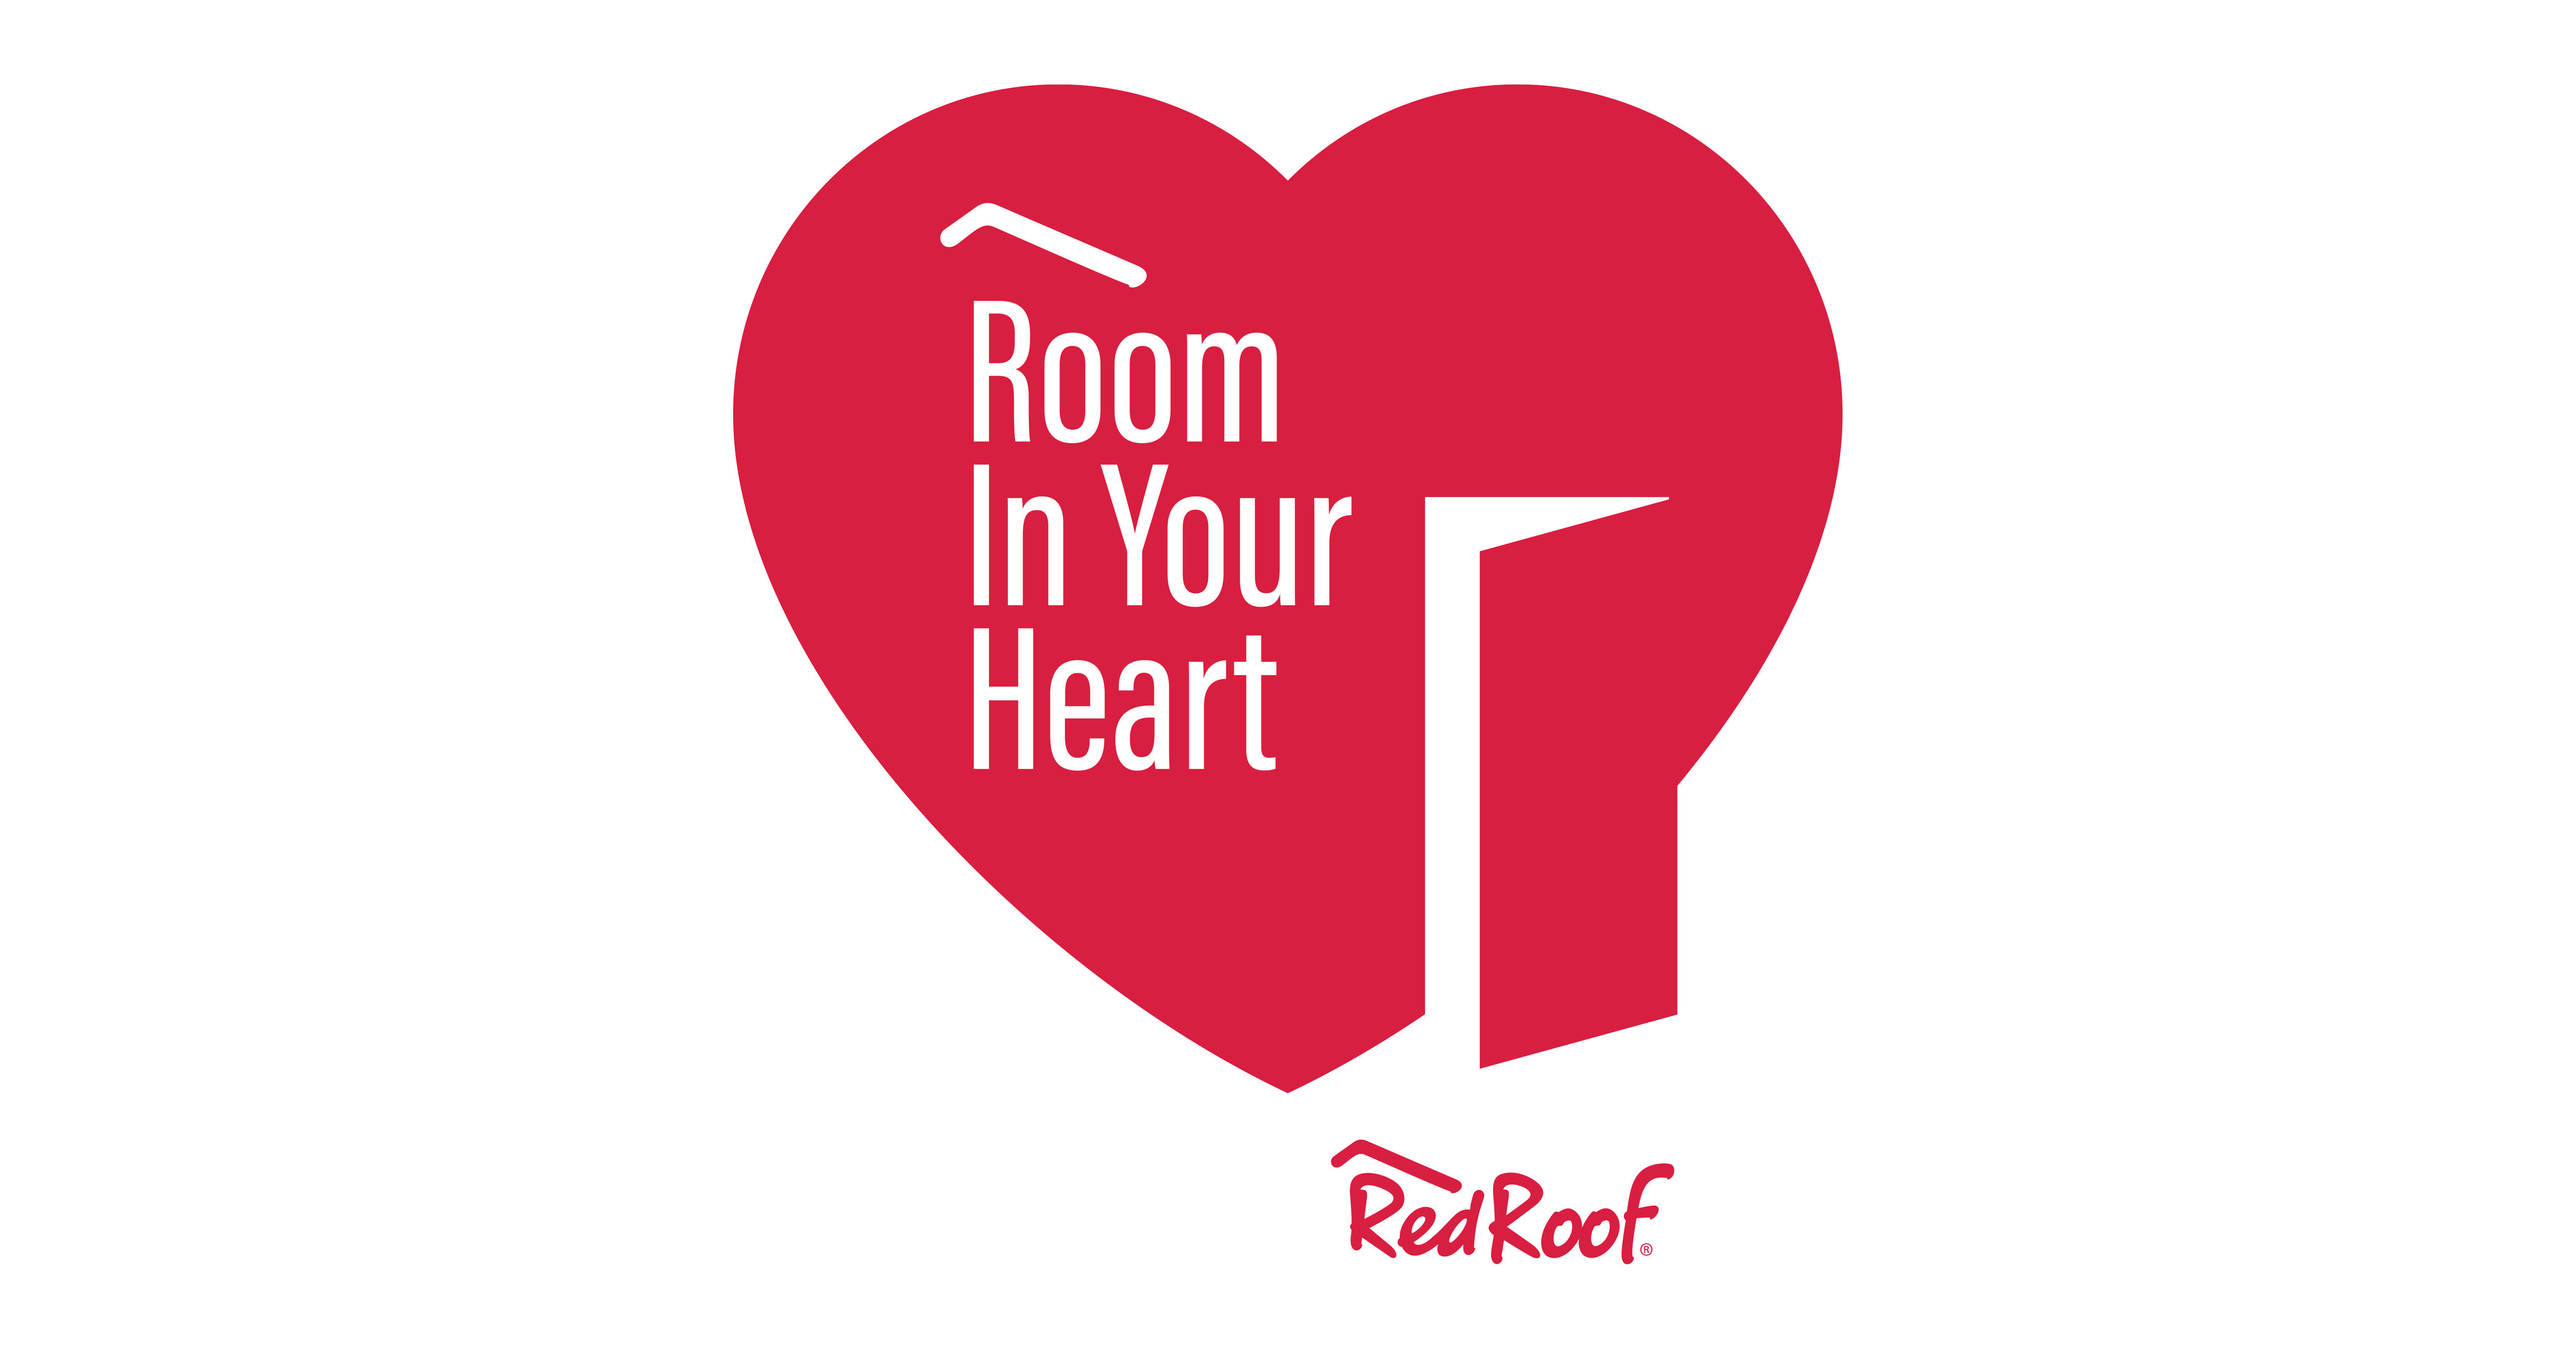 Red Roof® Invites Future Guests to Book 